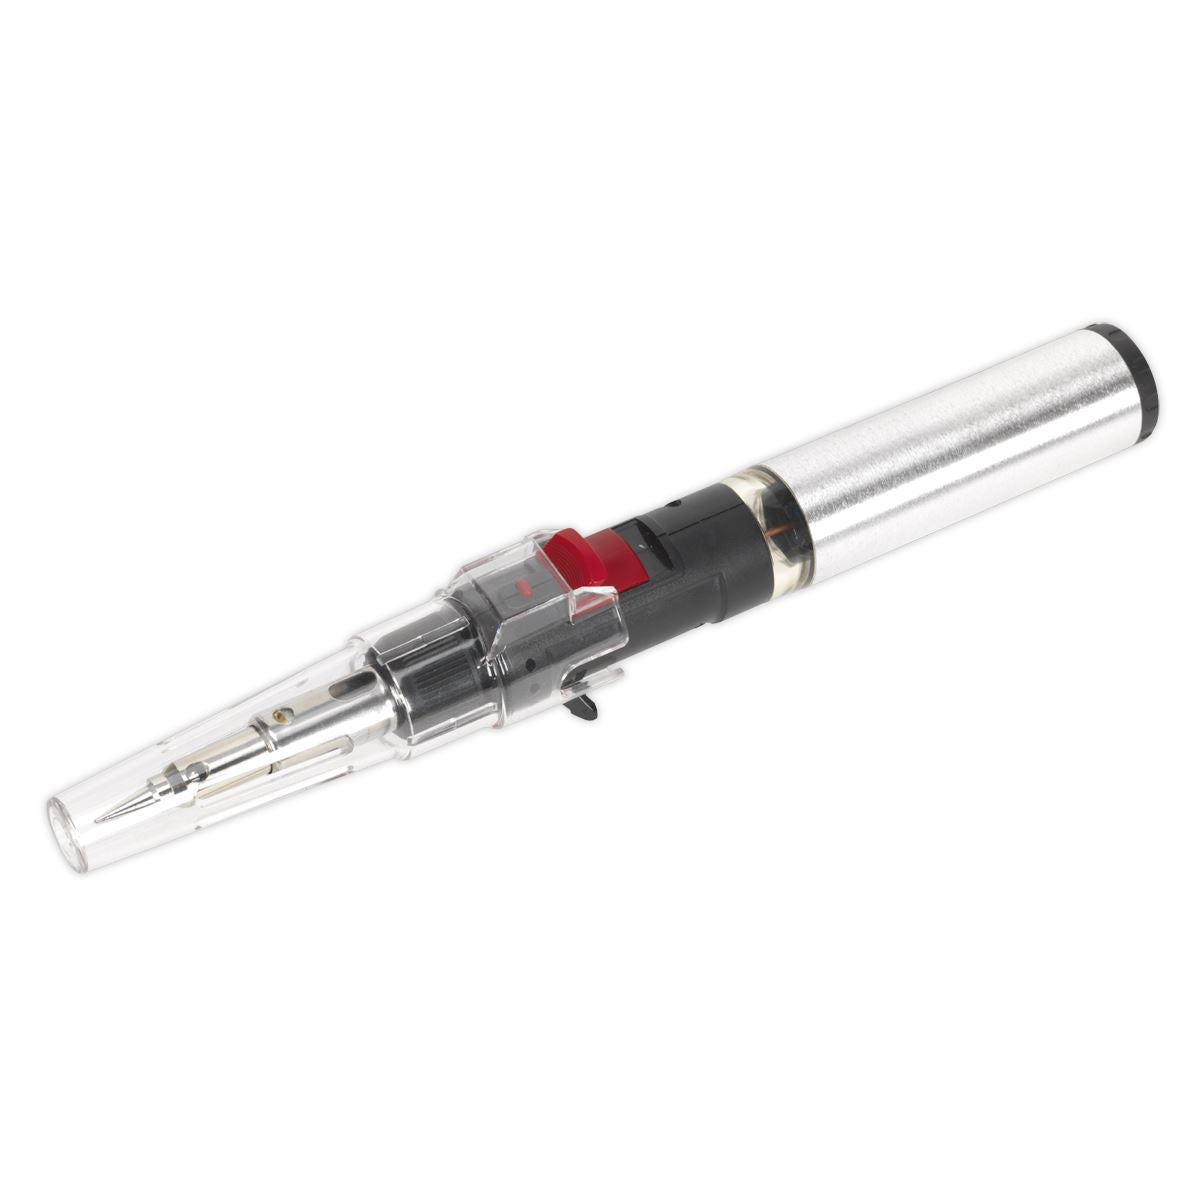 Sealey Premier Professional Soldering/Heating Torch